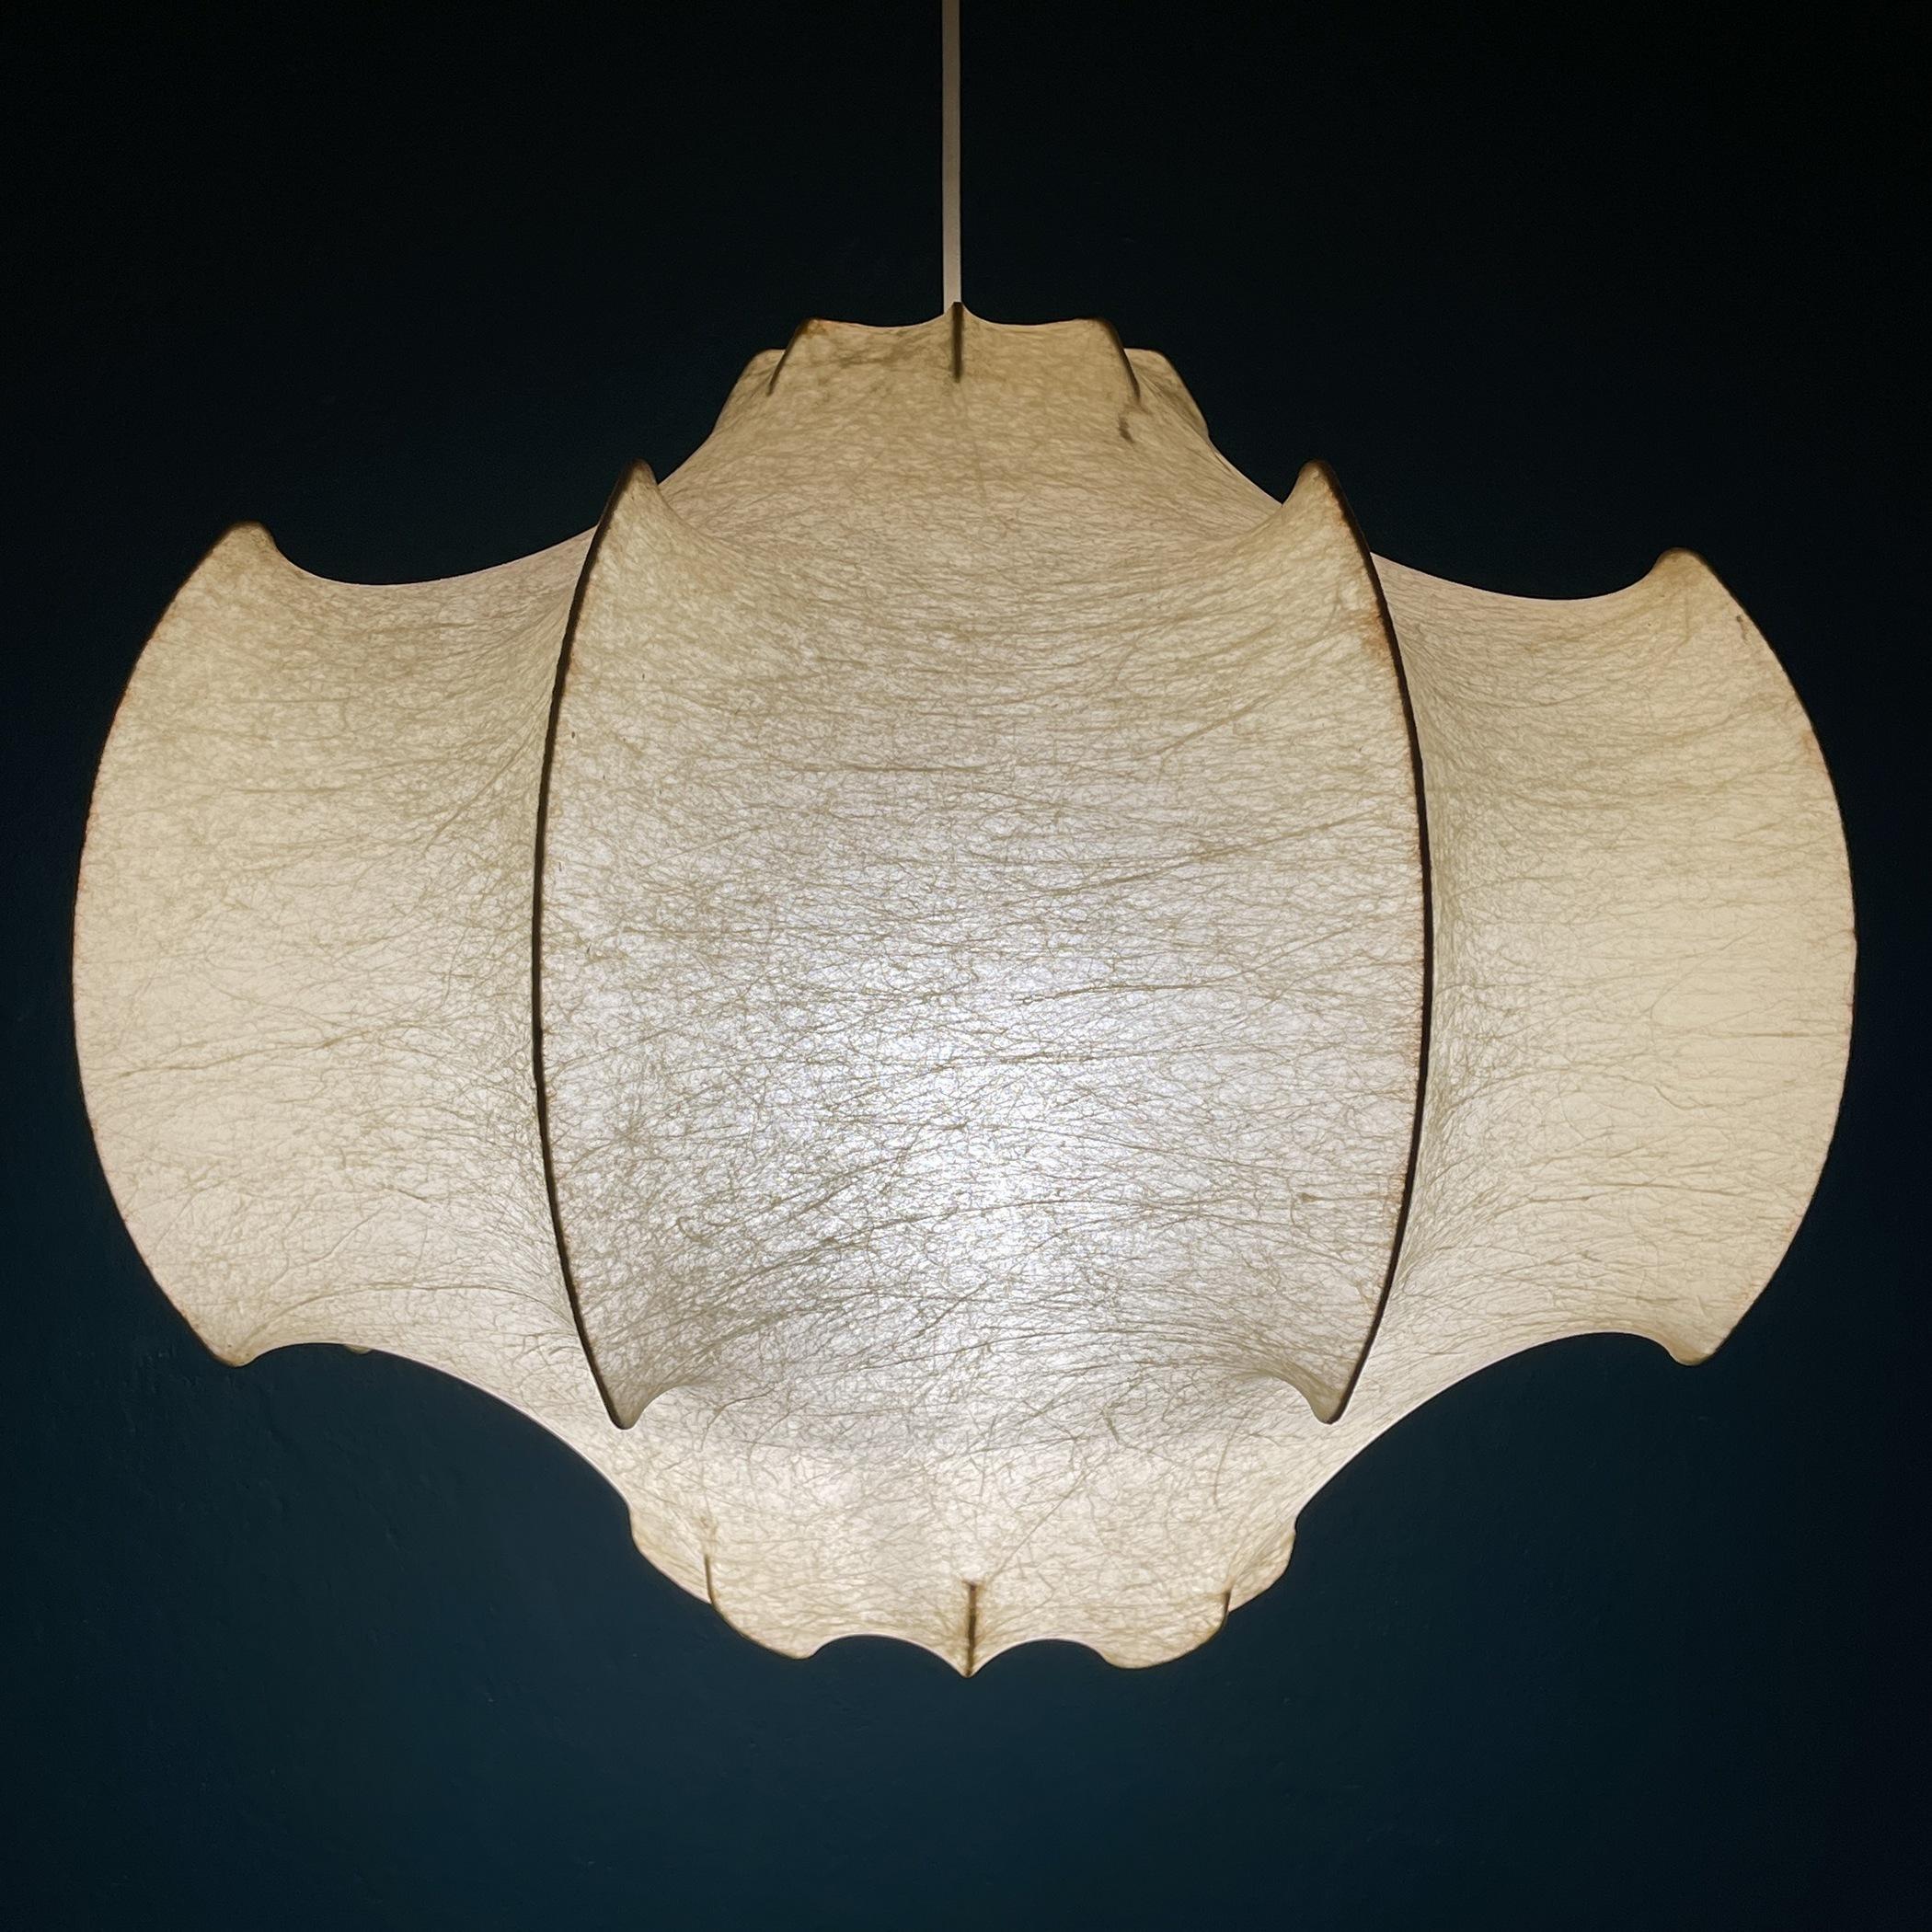 The rare mid-century pendant lamp Cocoon Viscontea by Achille Castiglioni for Flos was made in Italy in the 1960s. One of the most known and gorgeous of the Coccon lamps - Viscontea. The structure of the lamp is covered using a highly innovative